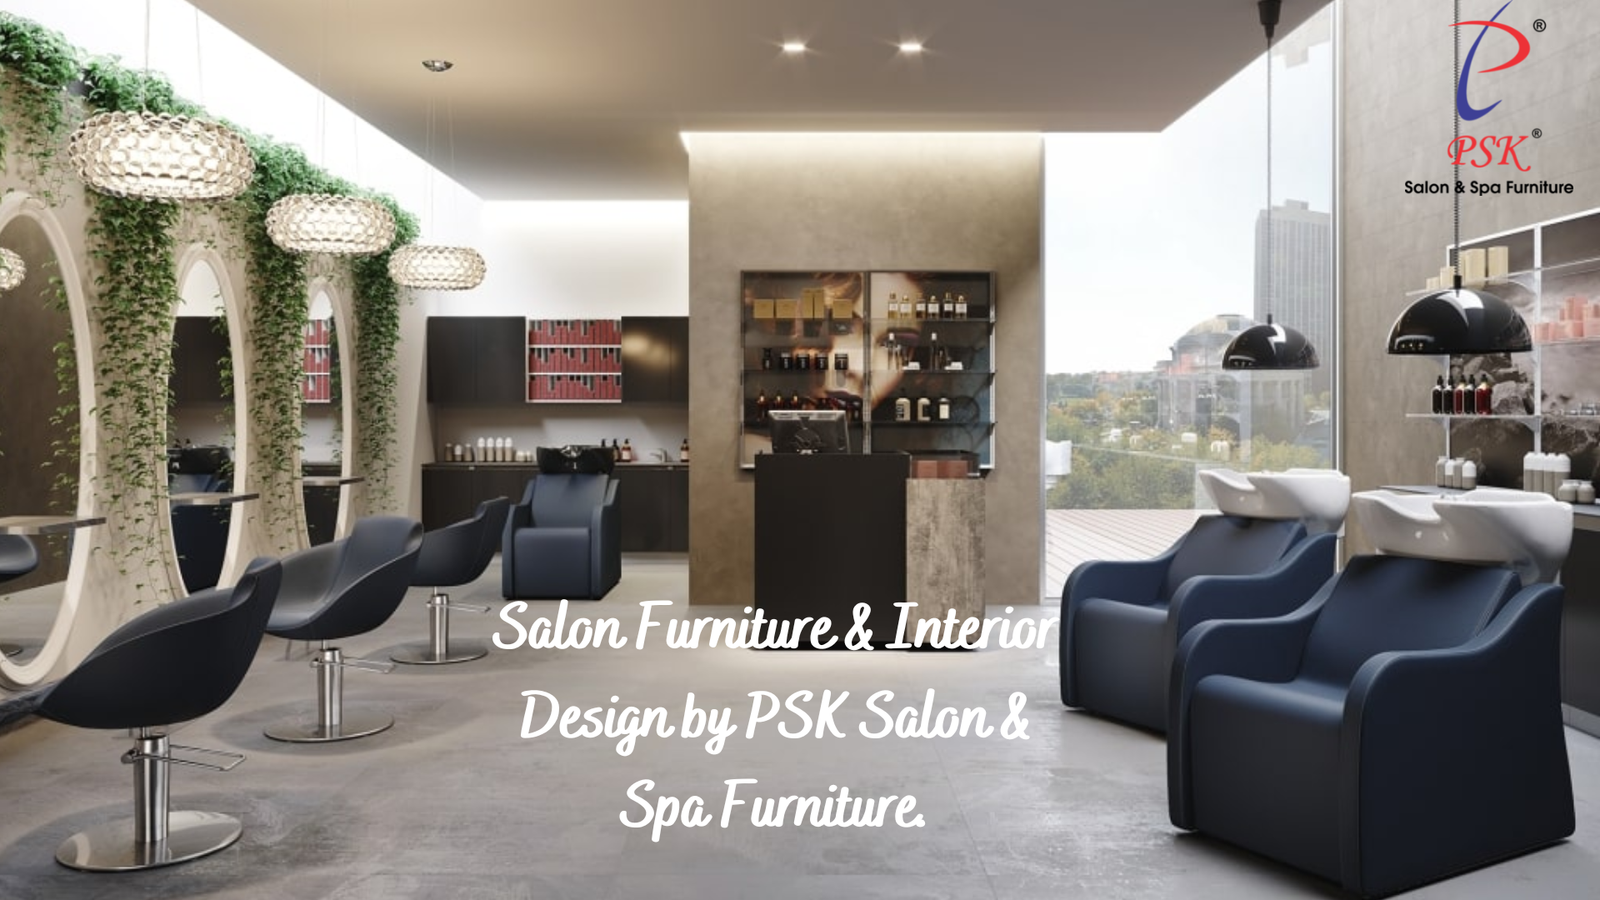 You are currently viewing Salon Furniture & Interior Design by PSK Salon & Spa Furniture.